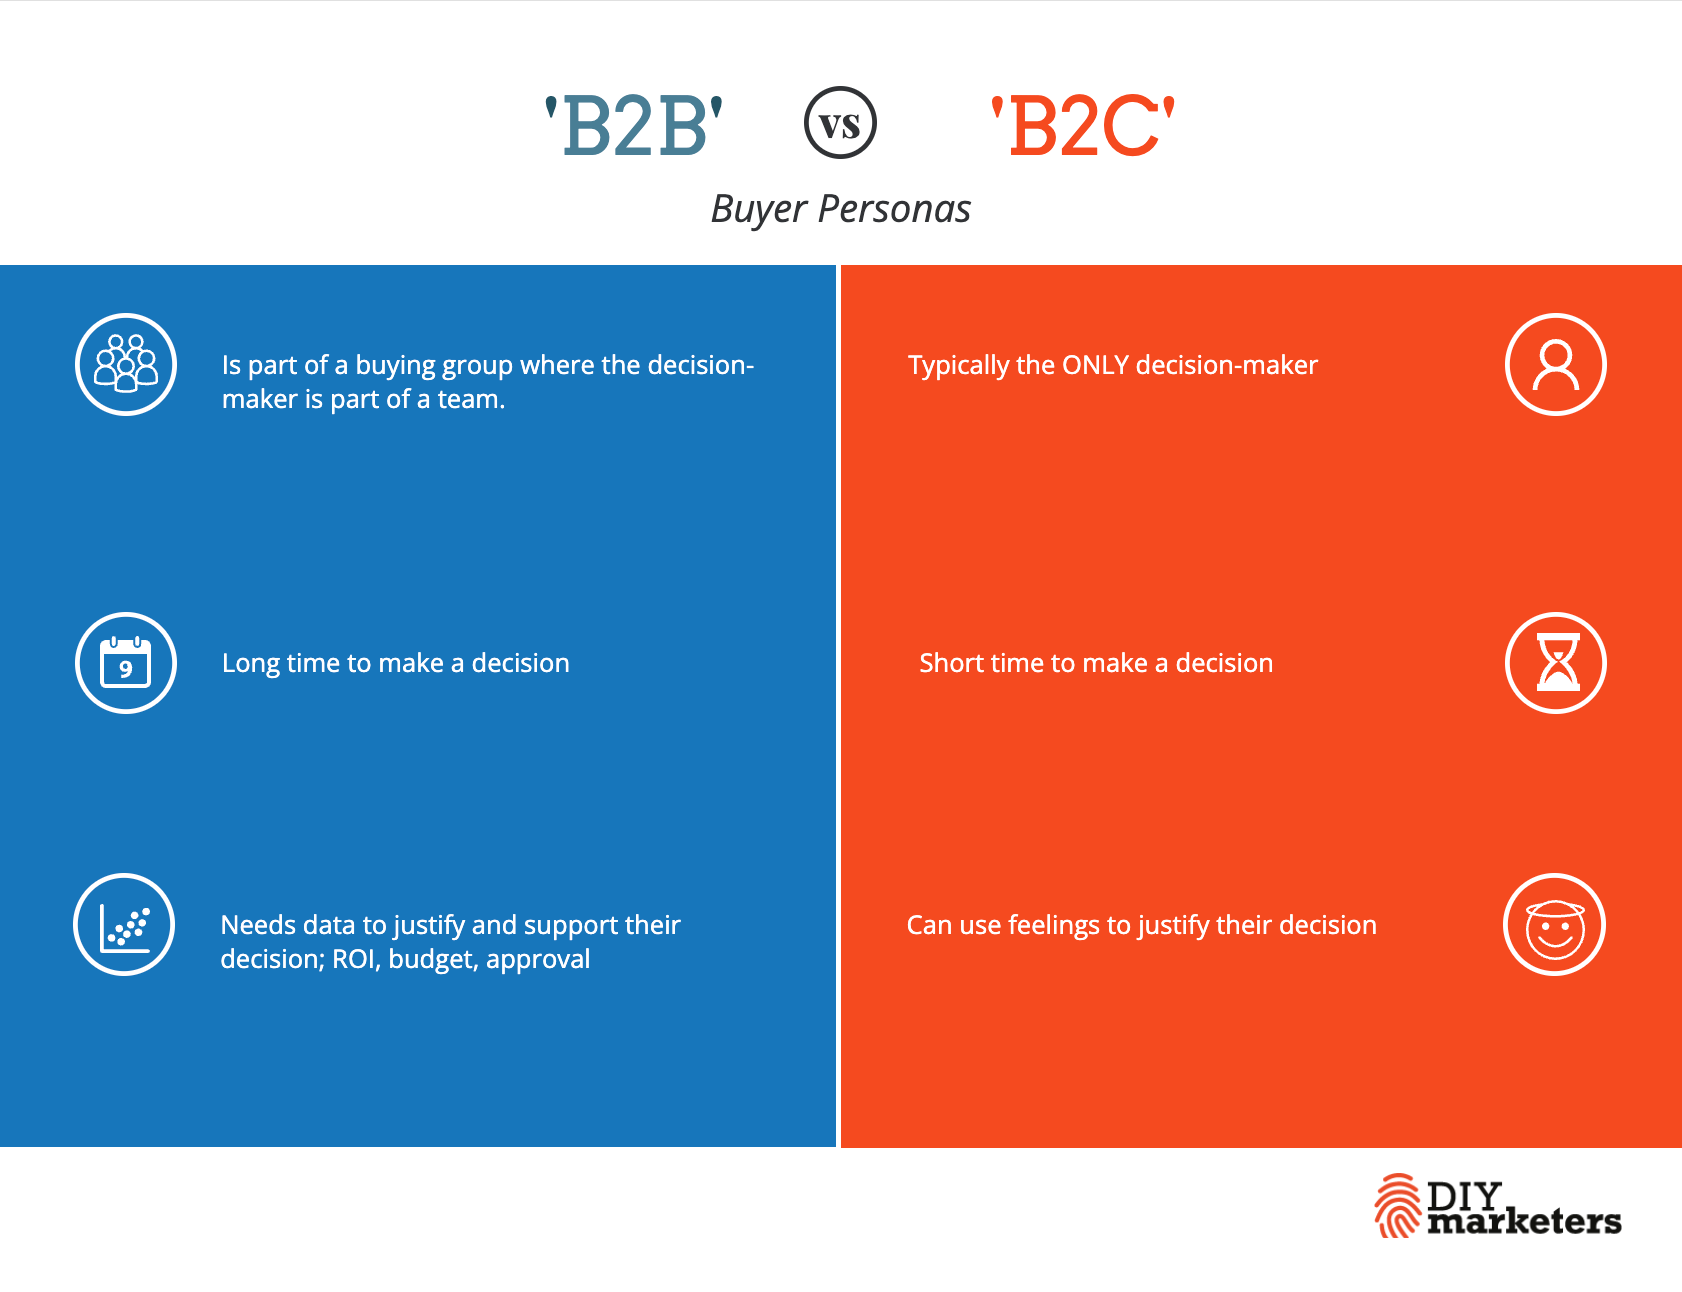 difference between B2B and B2C